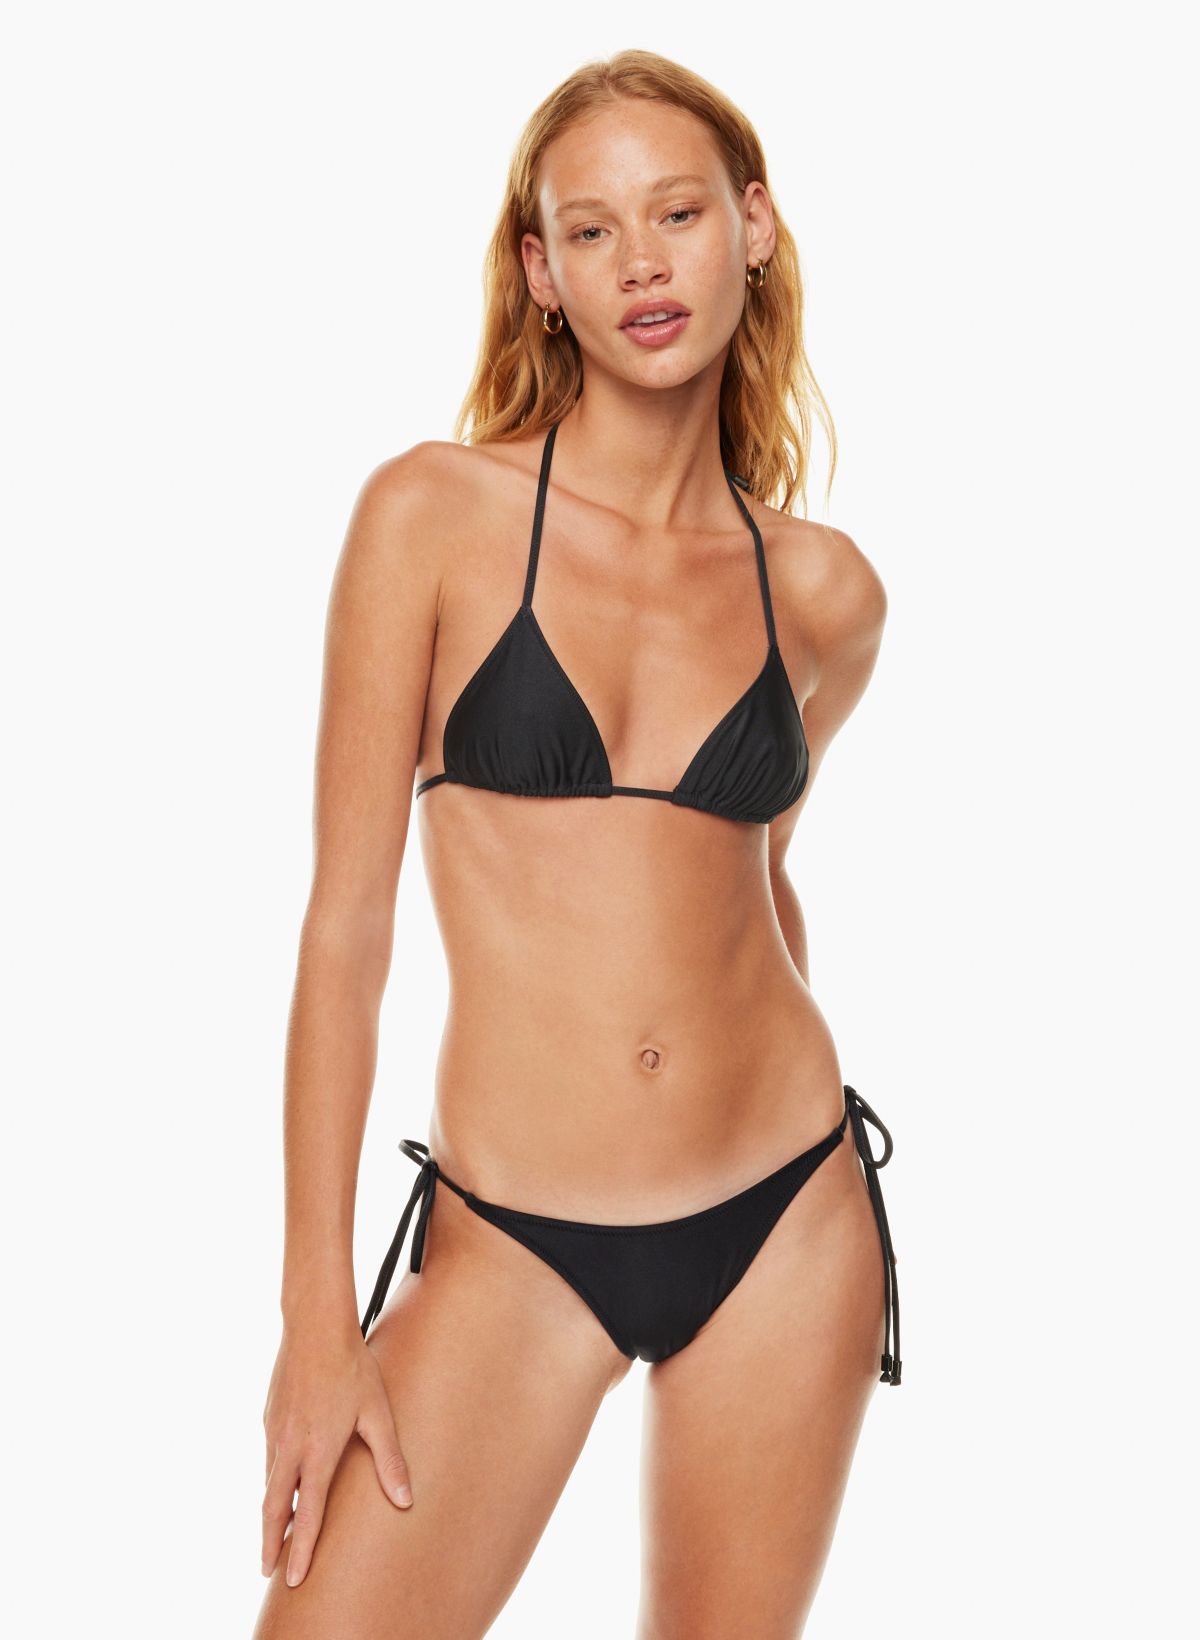 Oh Hey! Swimwear Up To A G-Cup